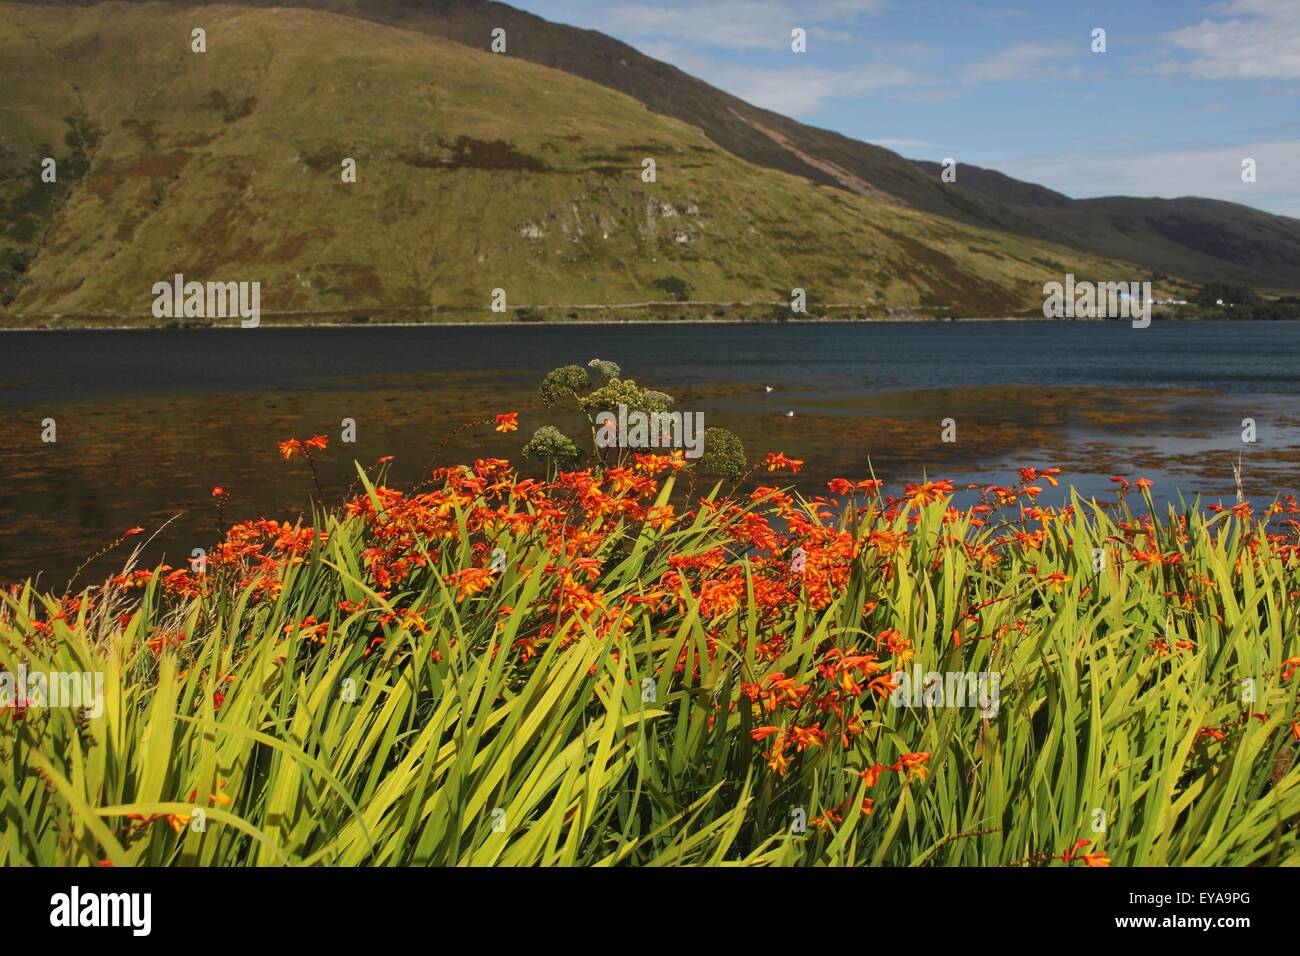 Wildflowers Along A Lake In Connacht Region; Leenane, County Galway, Ireland Stock Photo